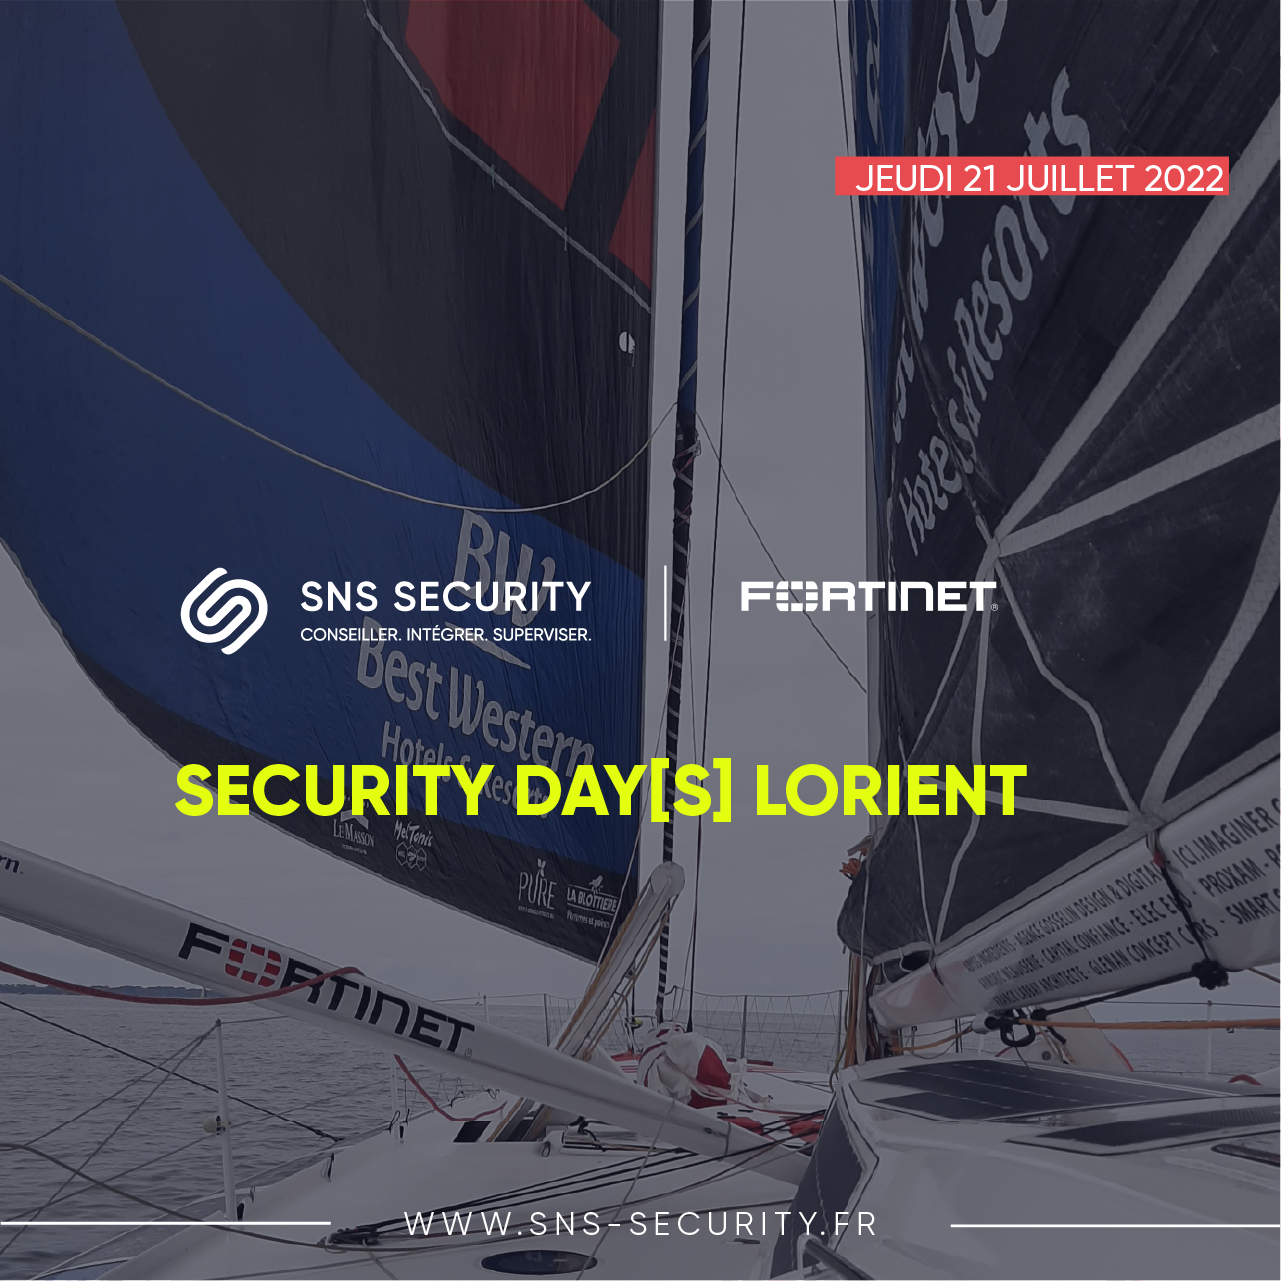 SECURITY DAYS Lorient IMOCA FORTINET